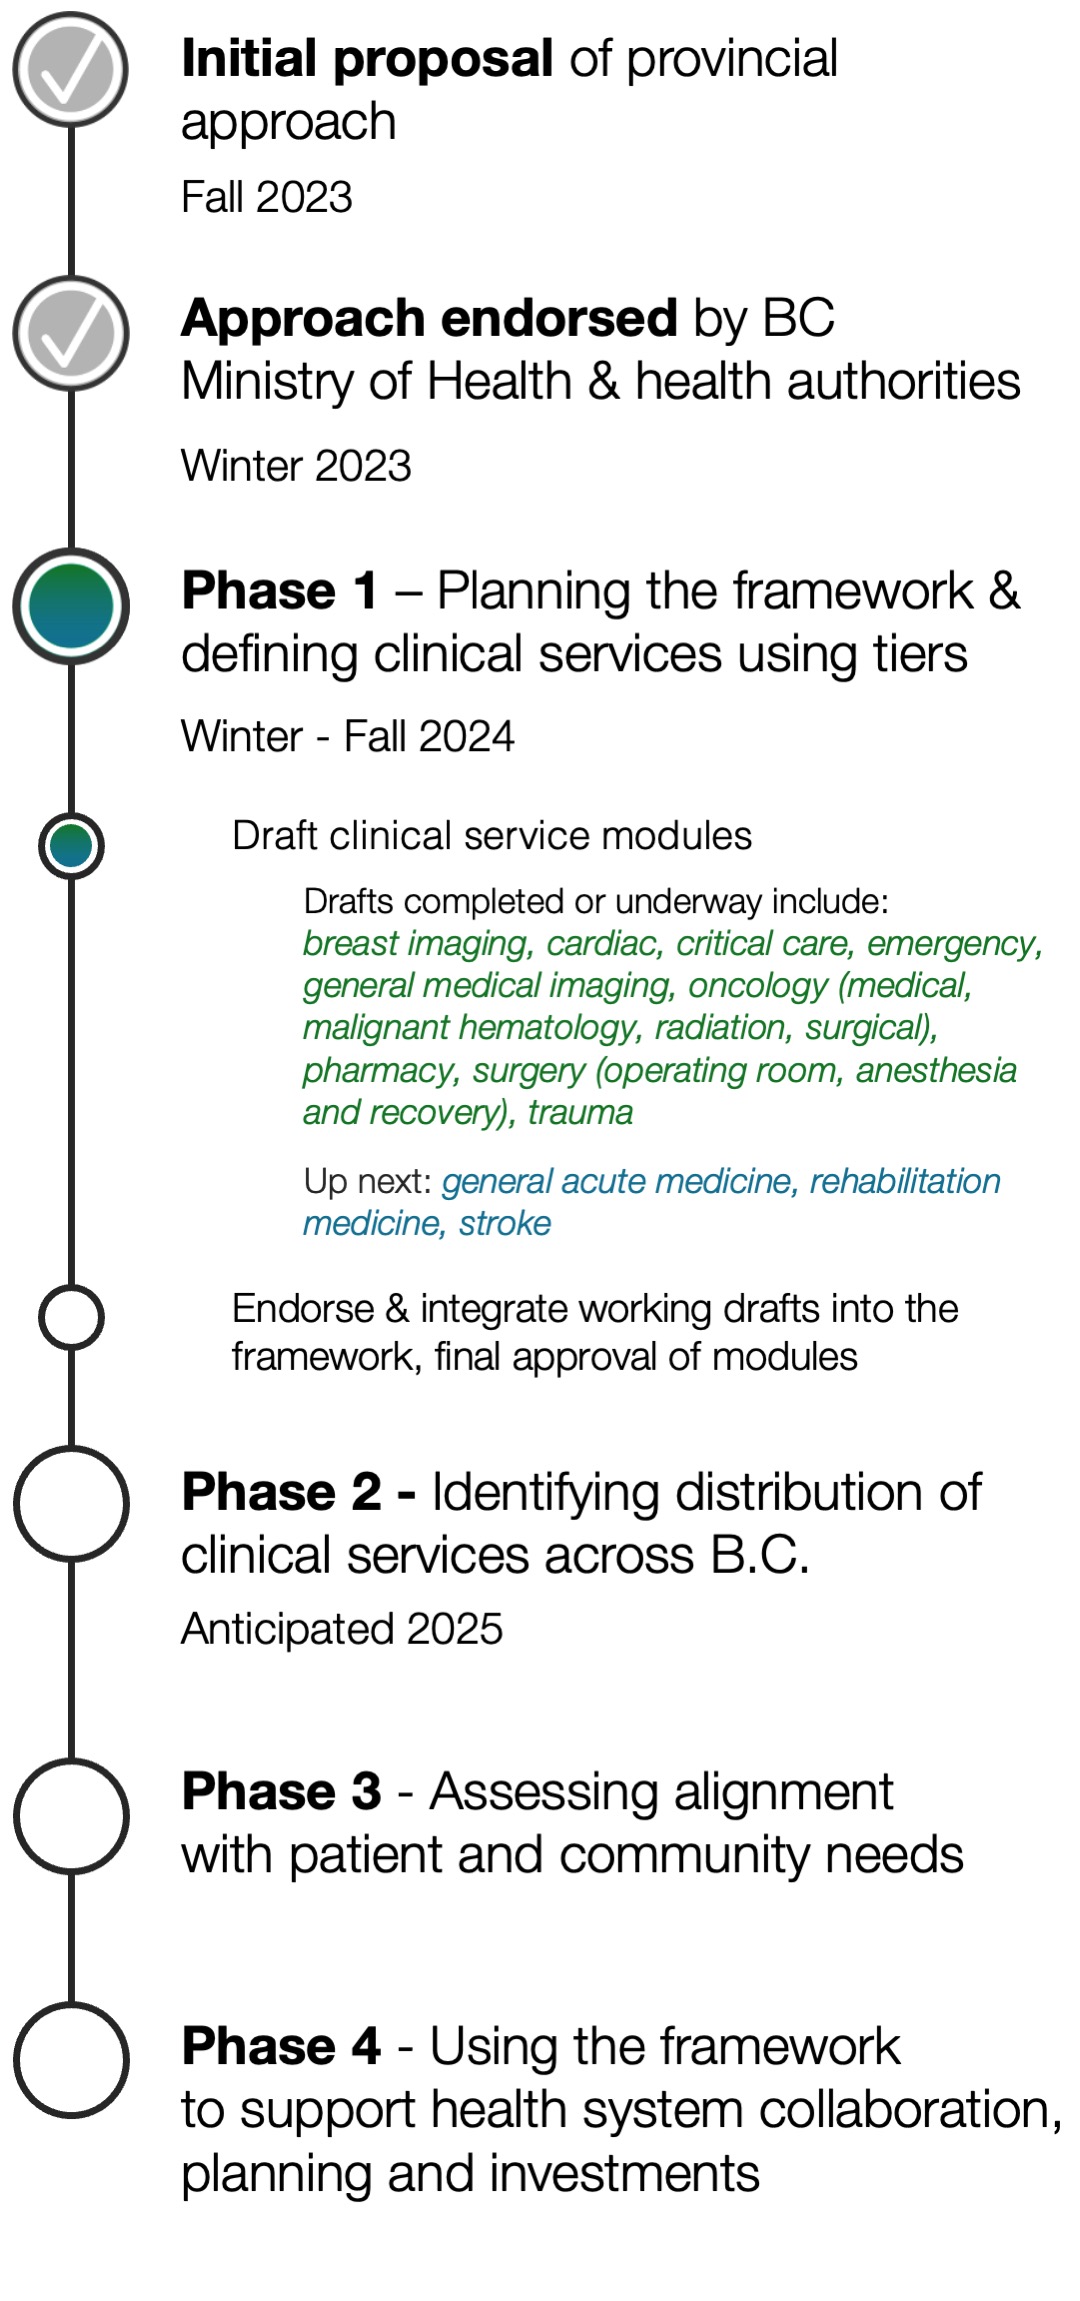 Timeline of key milestones and phases for the Tiers of Service framework in B.C. 